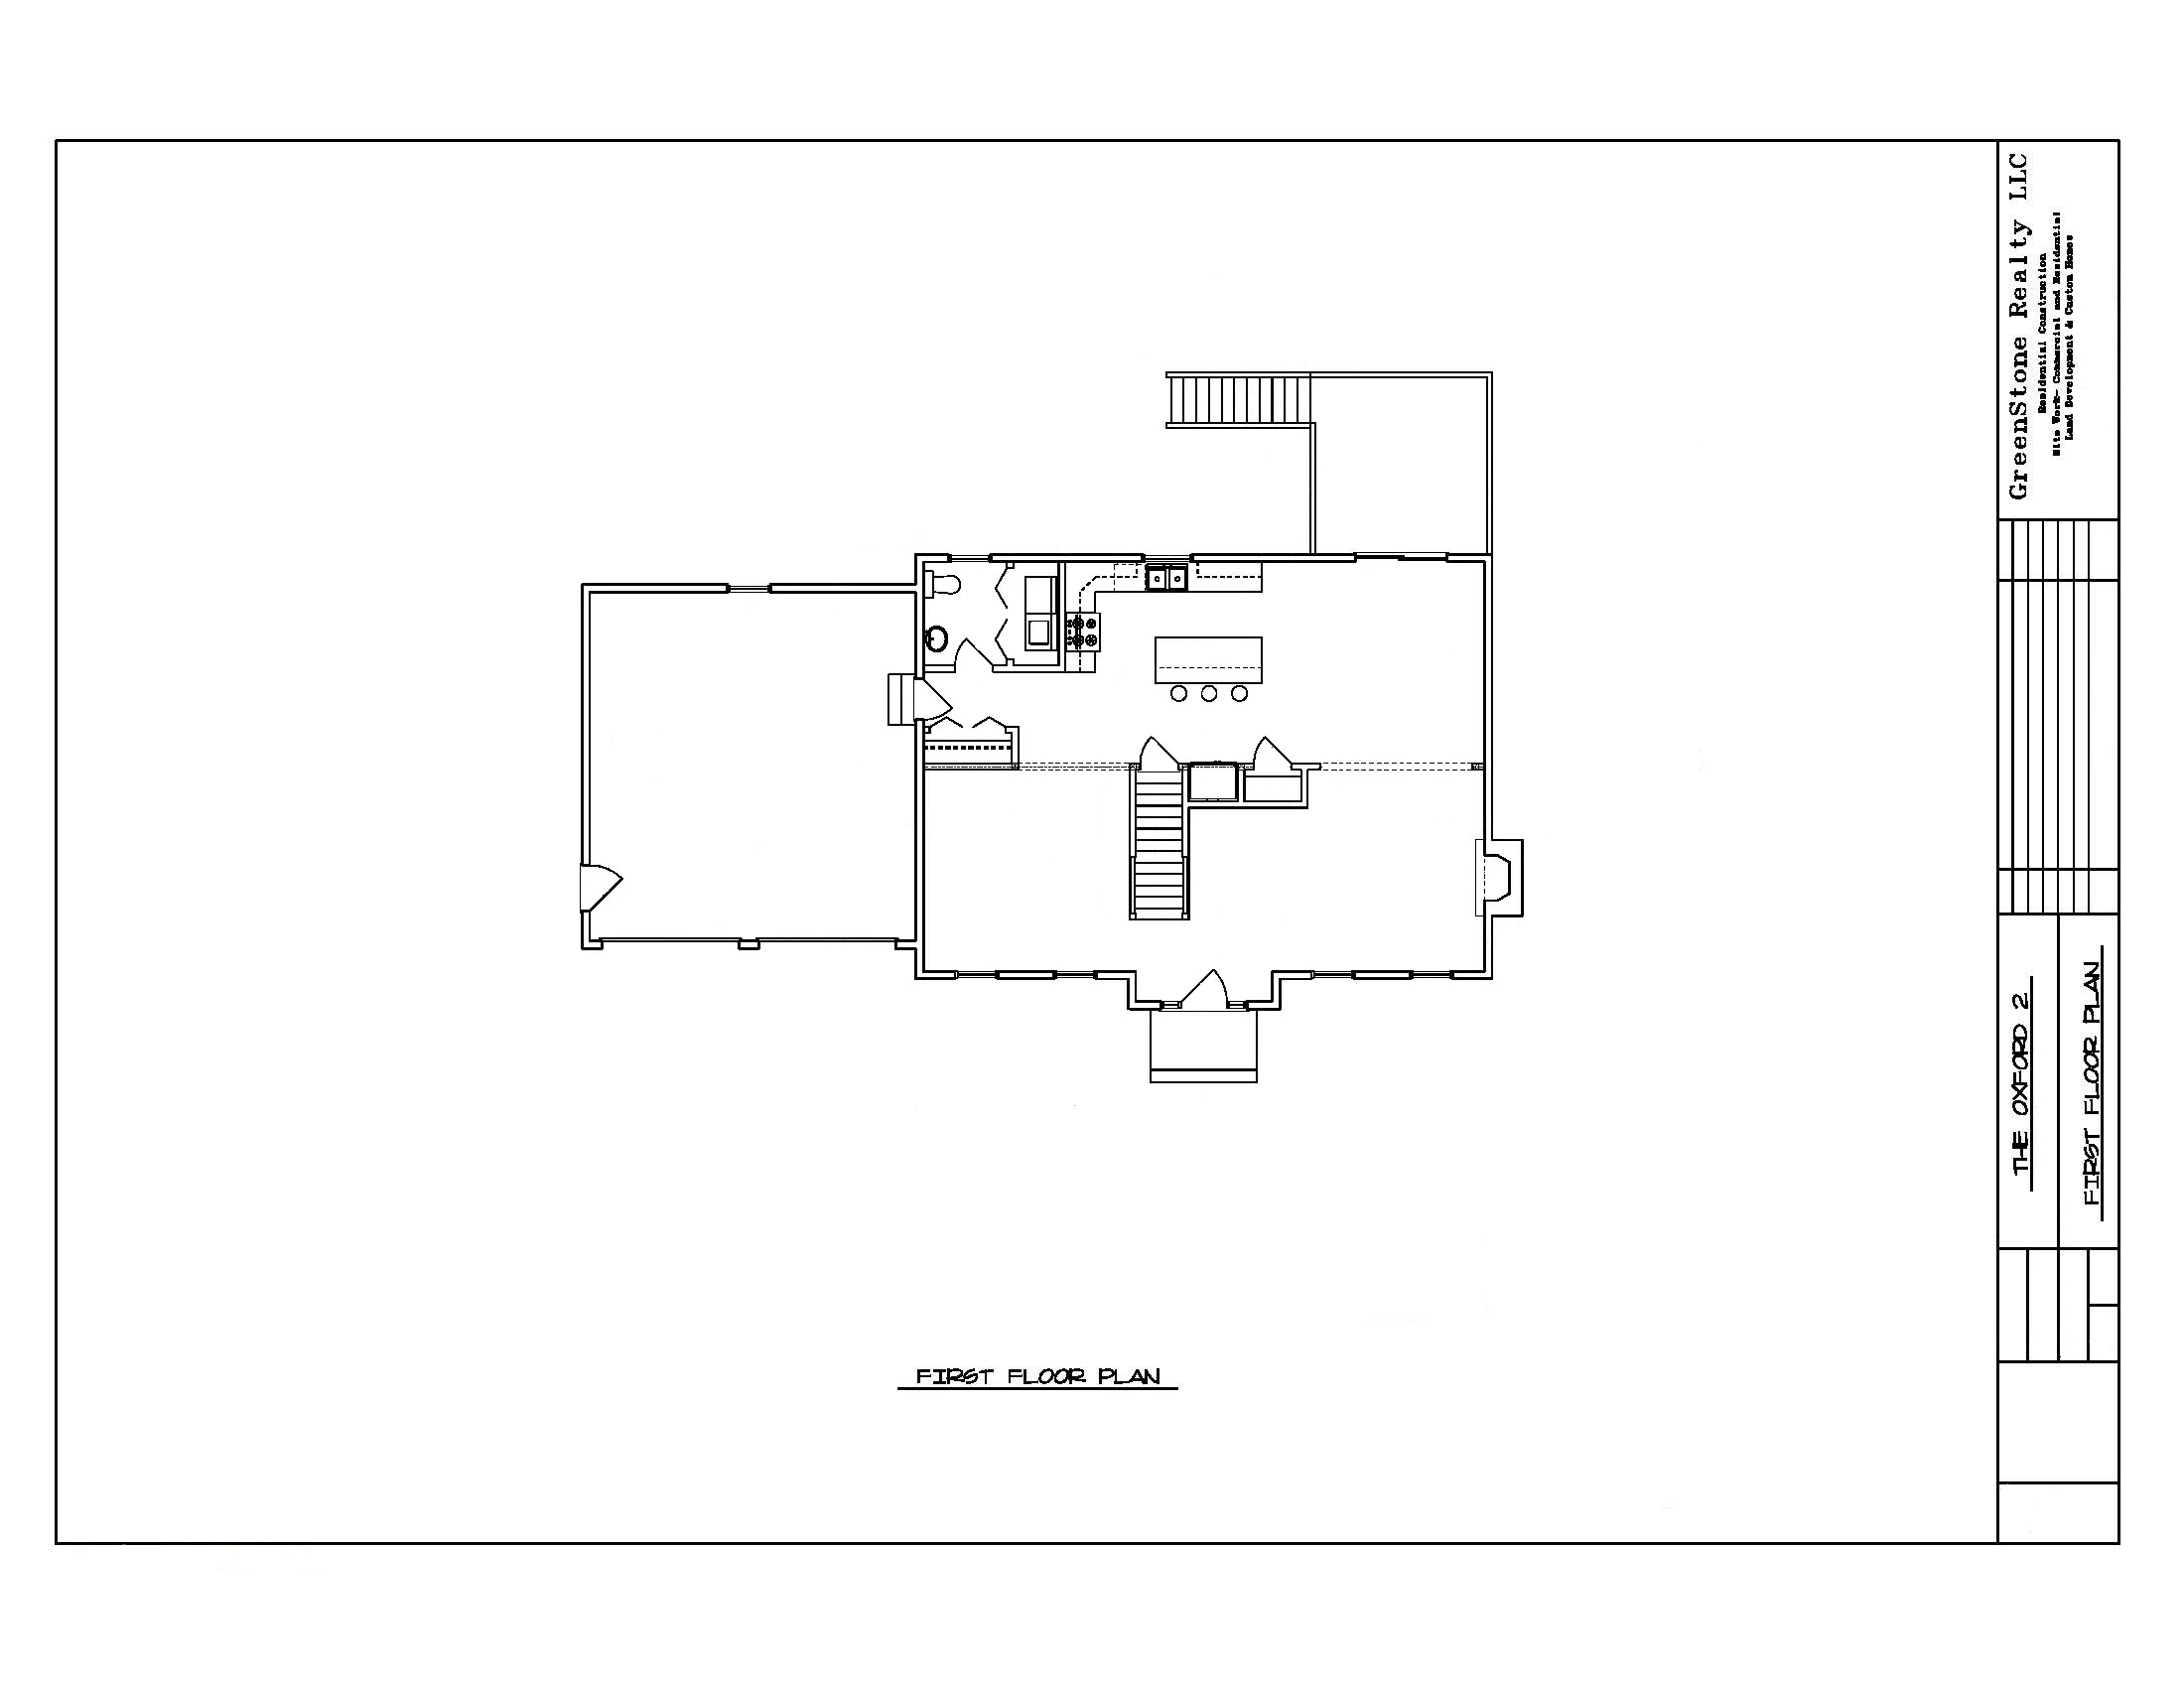 The Oxford First Floor Plan